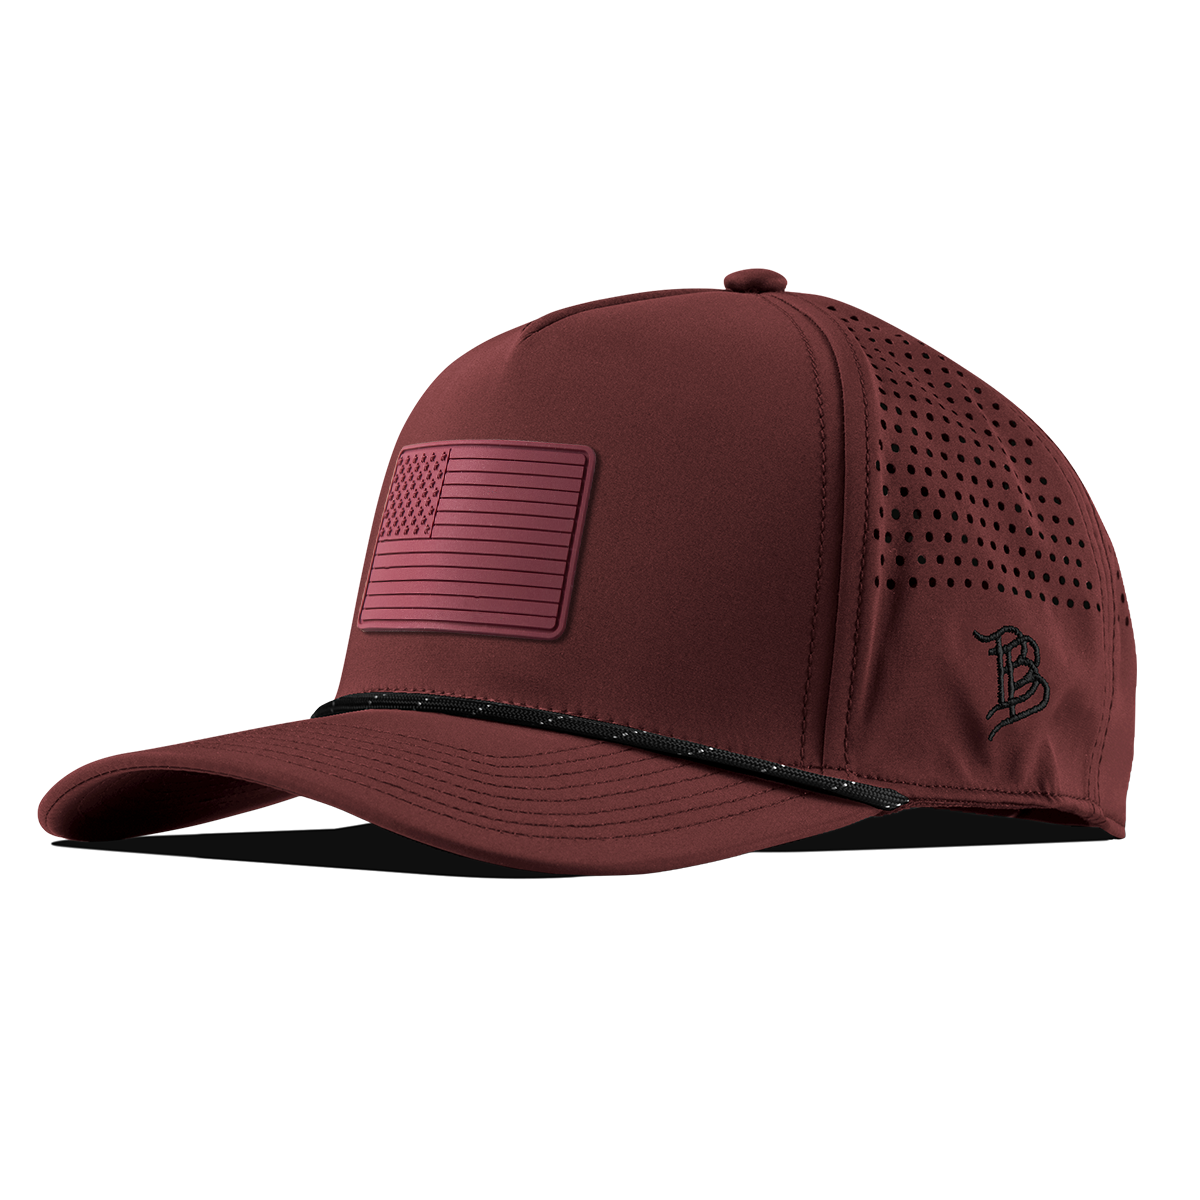 Old Glory Stealth Curved 5 Panel Rope Maroon/Black